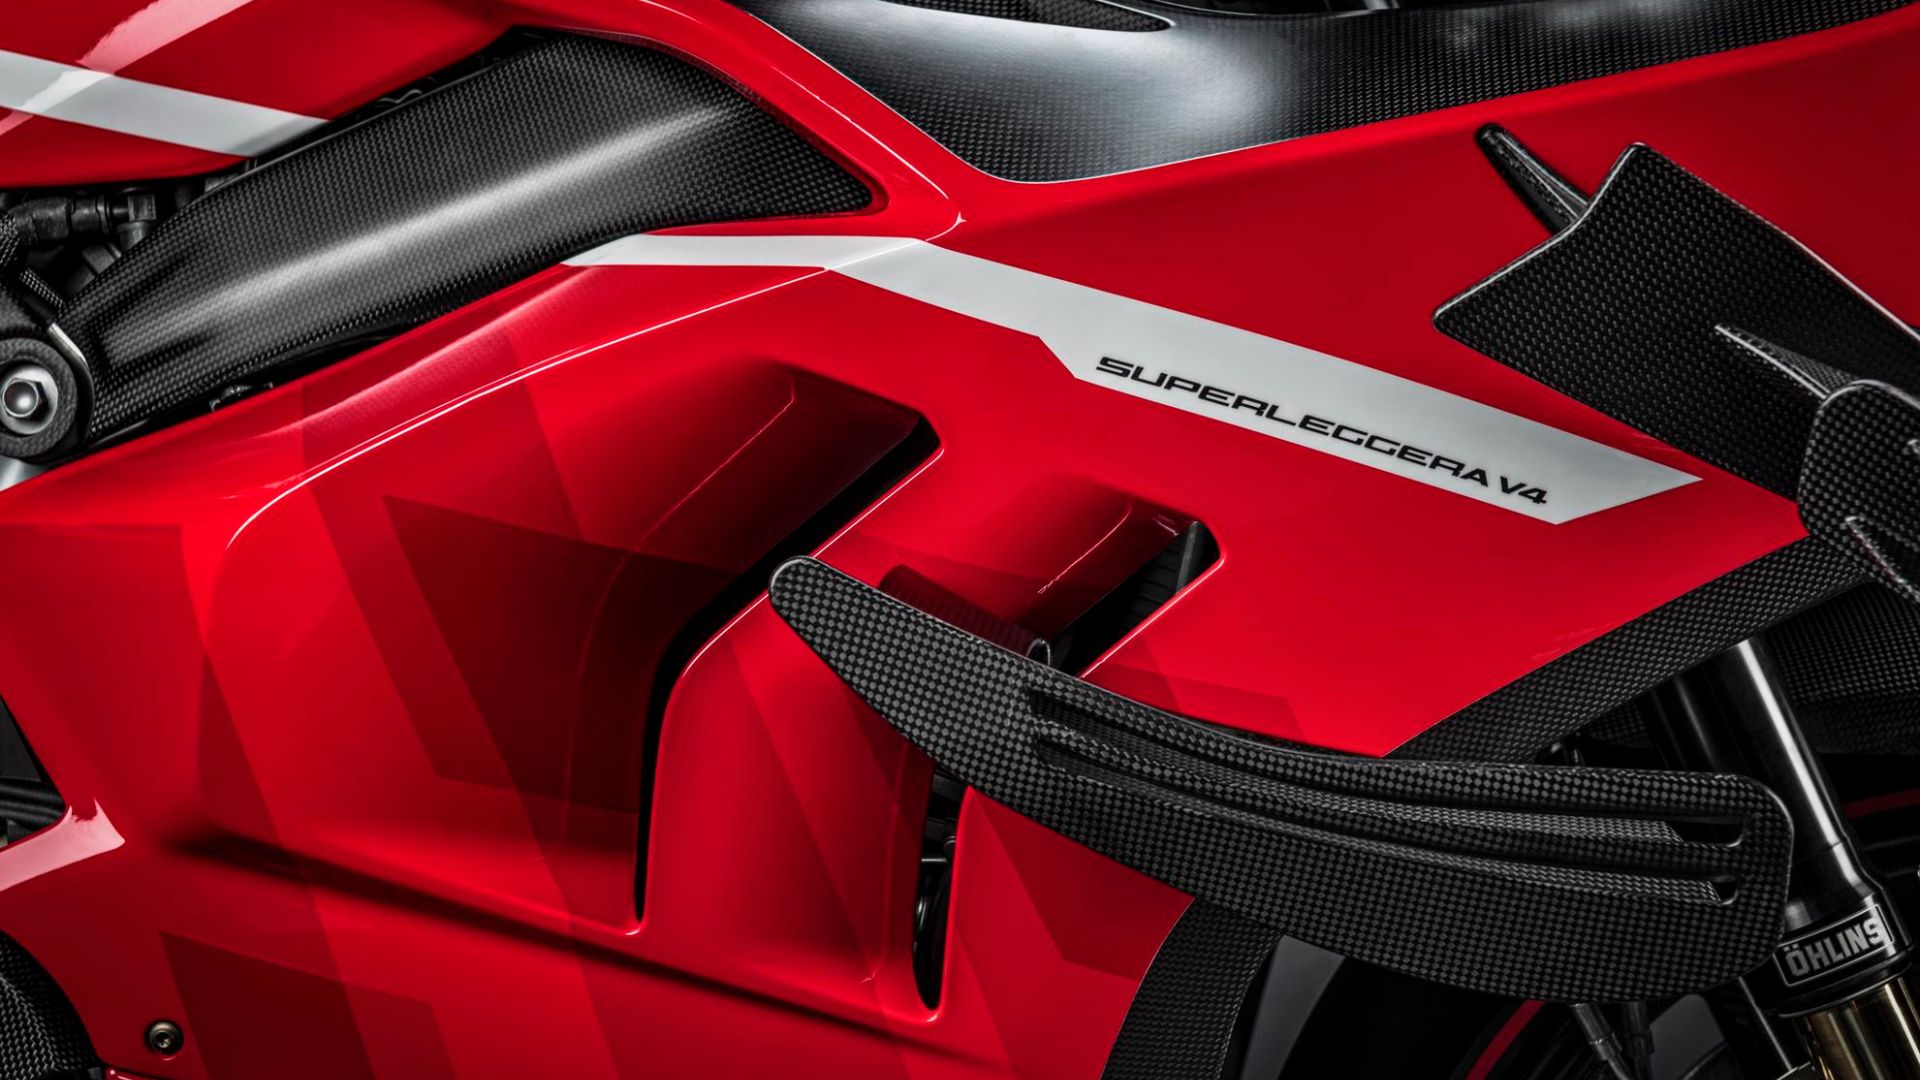 2020 Ducati Panigale Superleggera V4 More Power Less Weight And Did We Mention Aero Fins